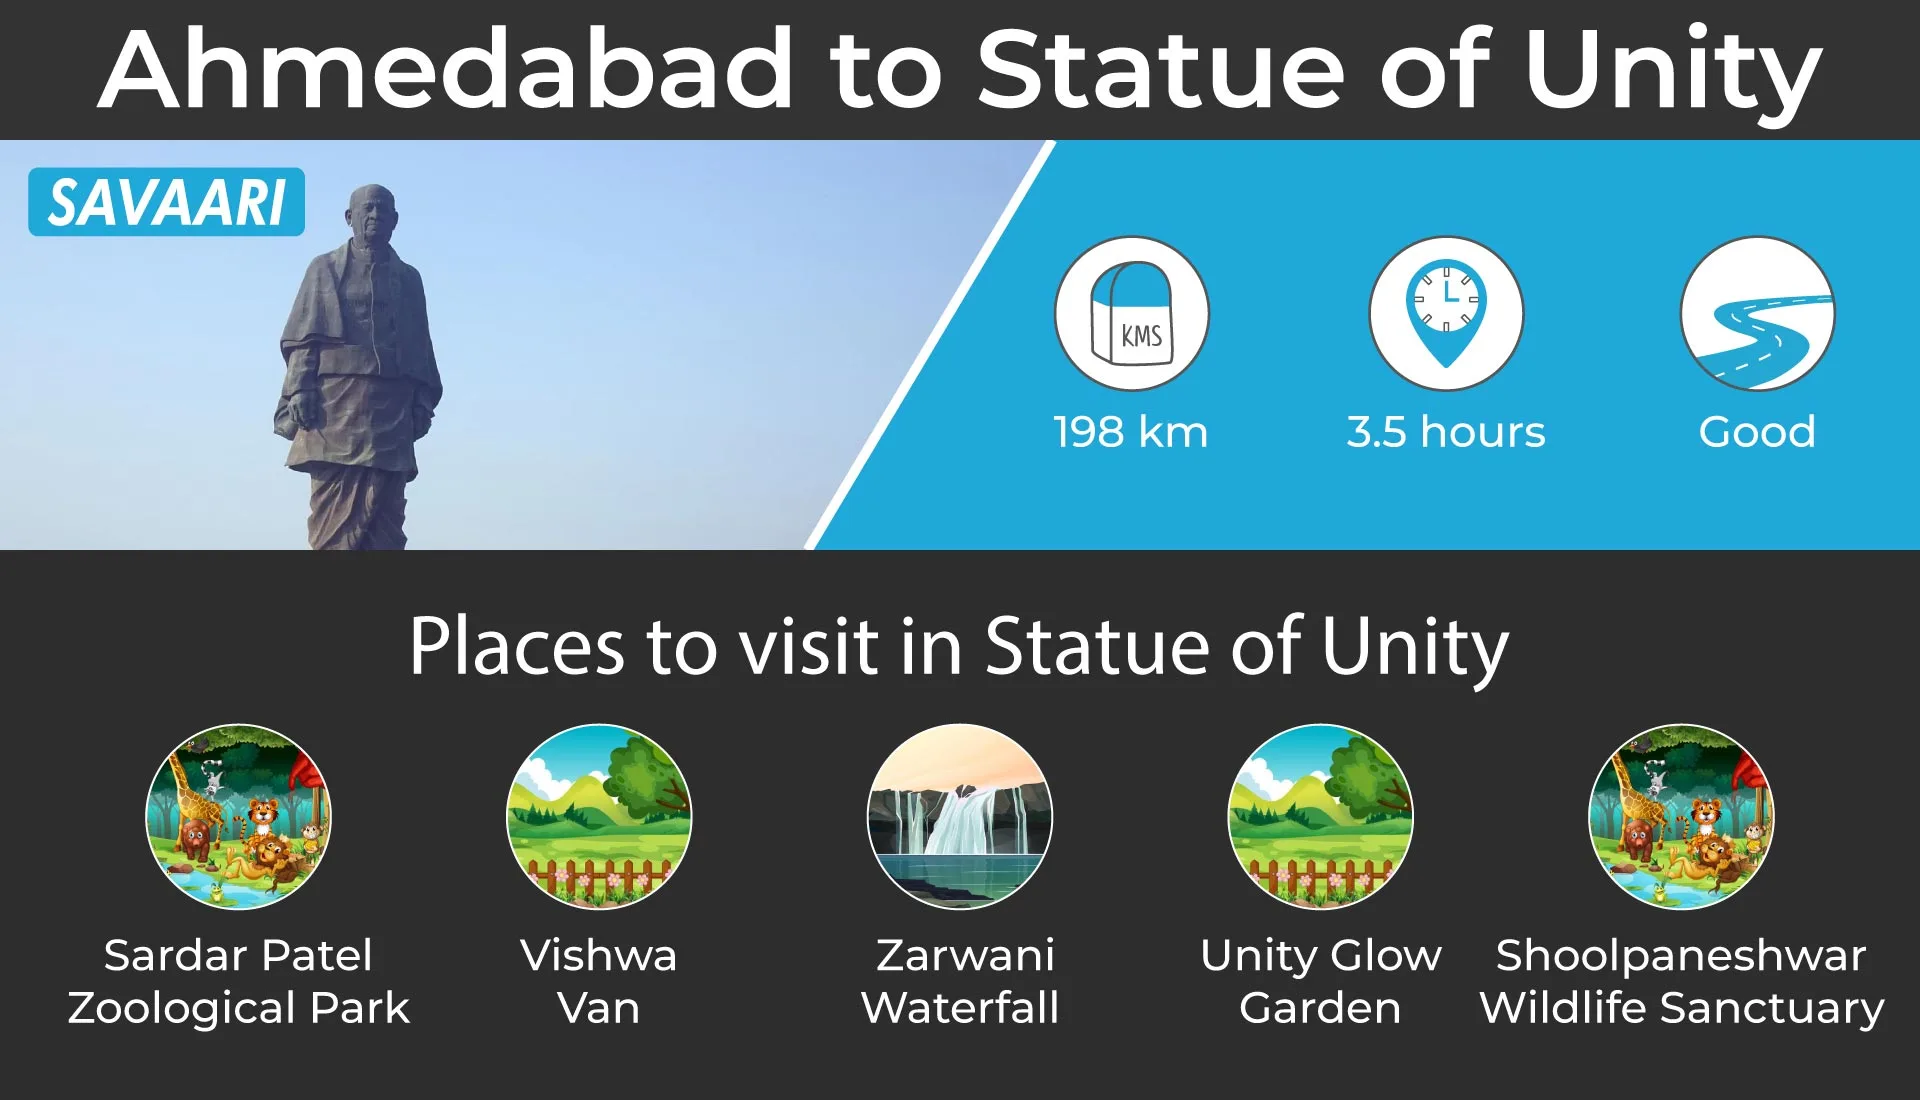 Statue of Unity - Places to visit near Ahmedabad